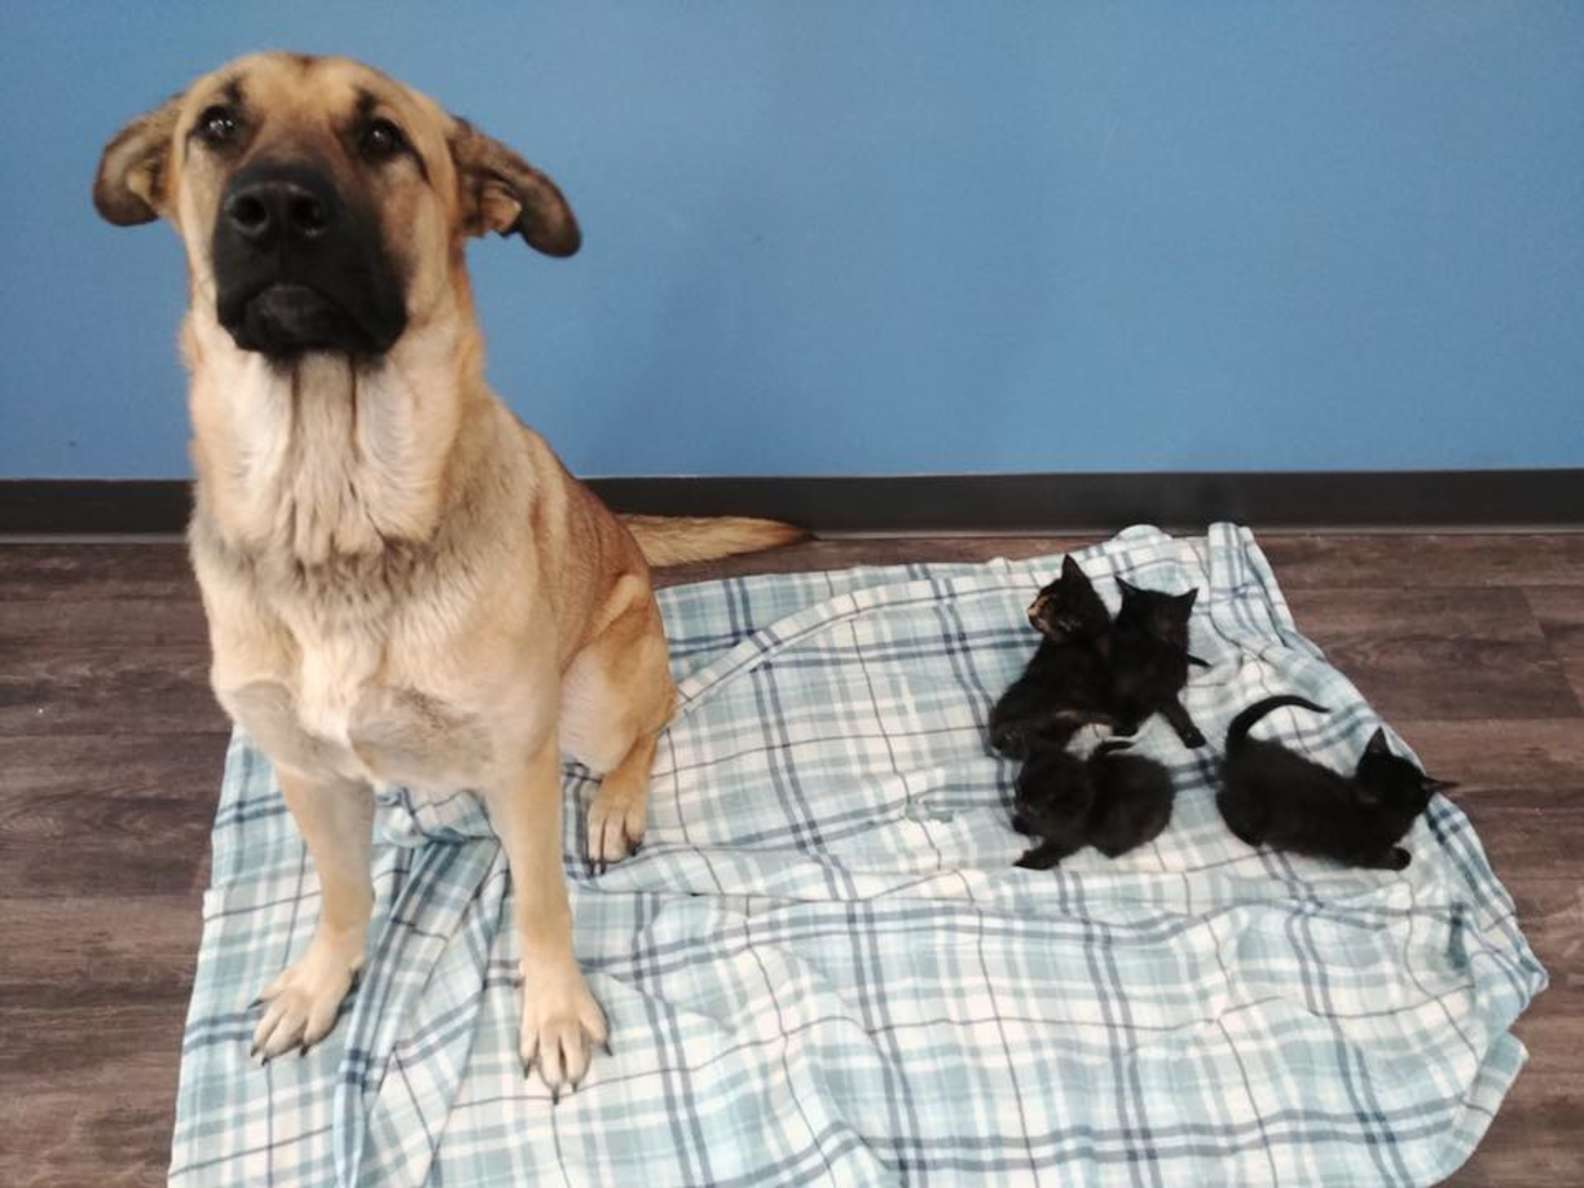 A stray dog was found curled up in snow keeping orphaned kittens warm